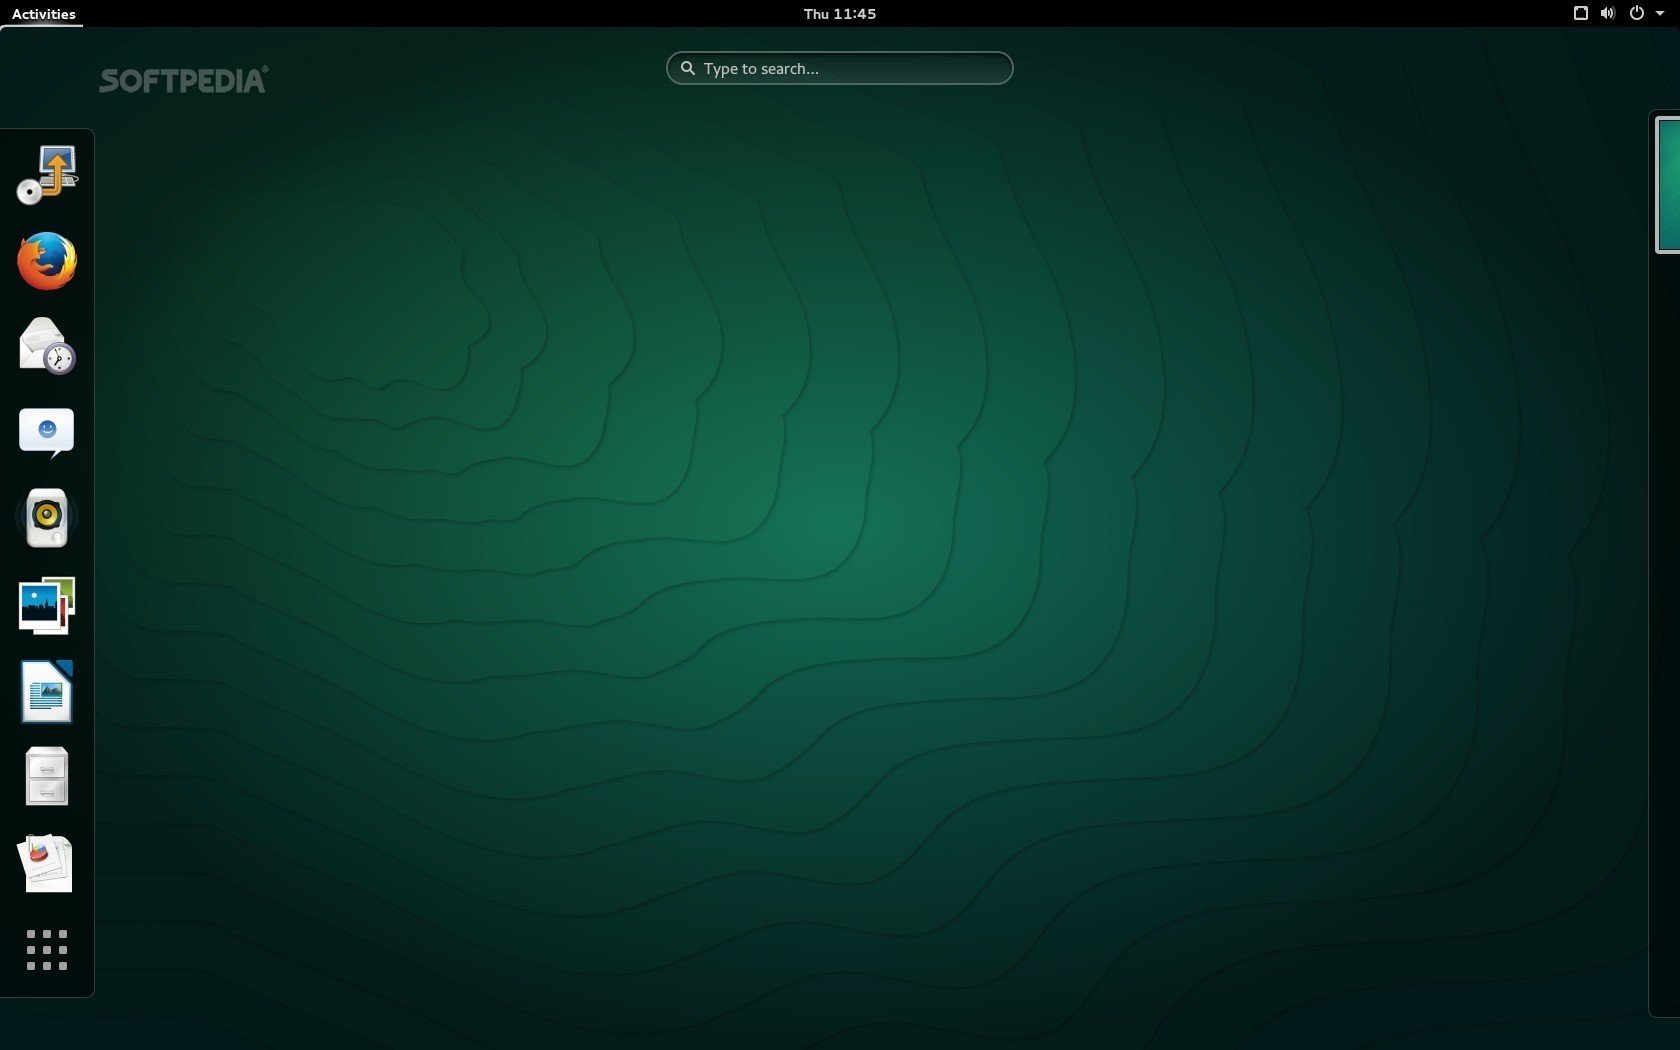 opensuse 13.2